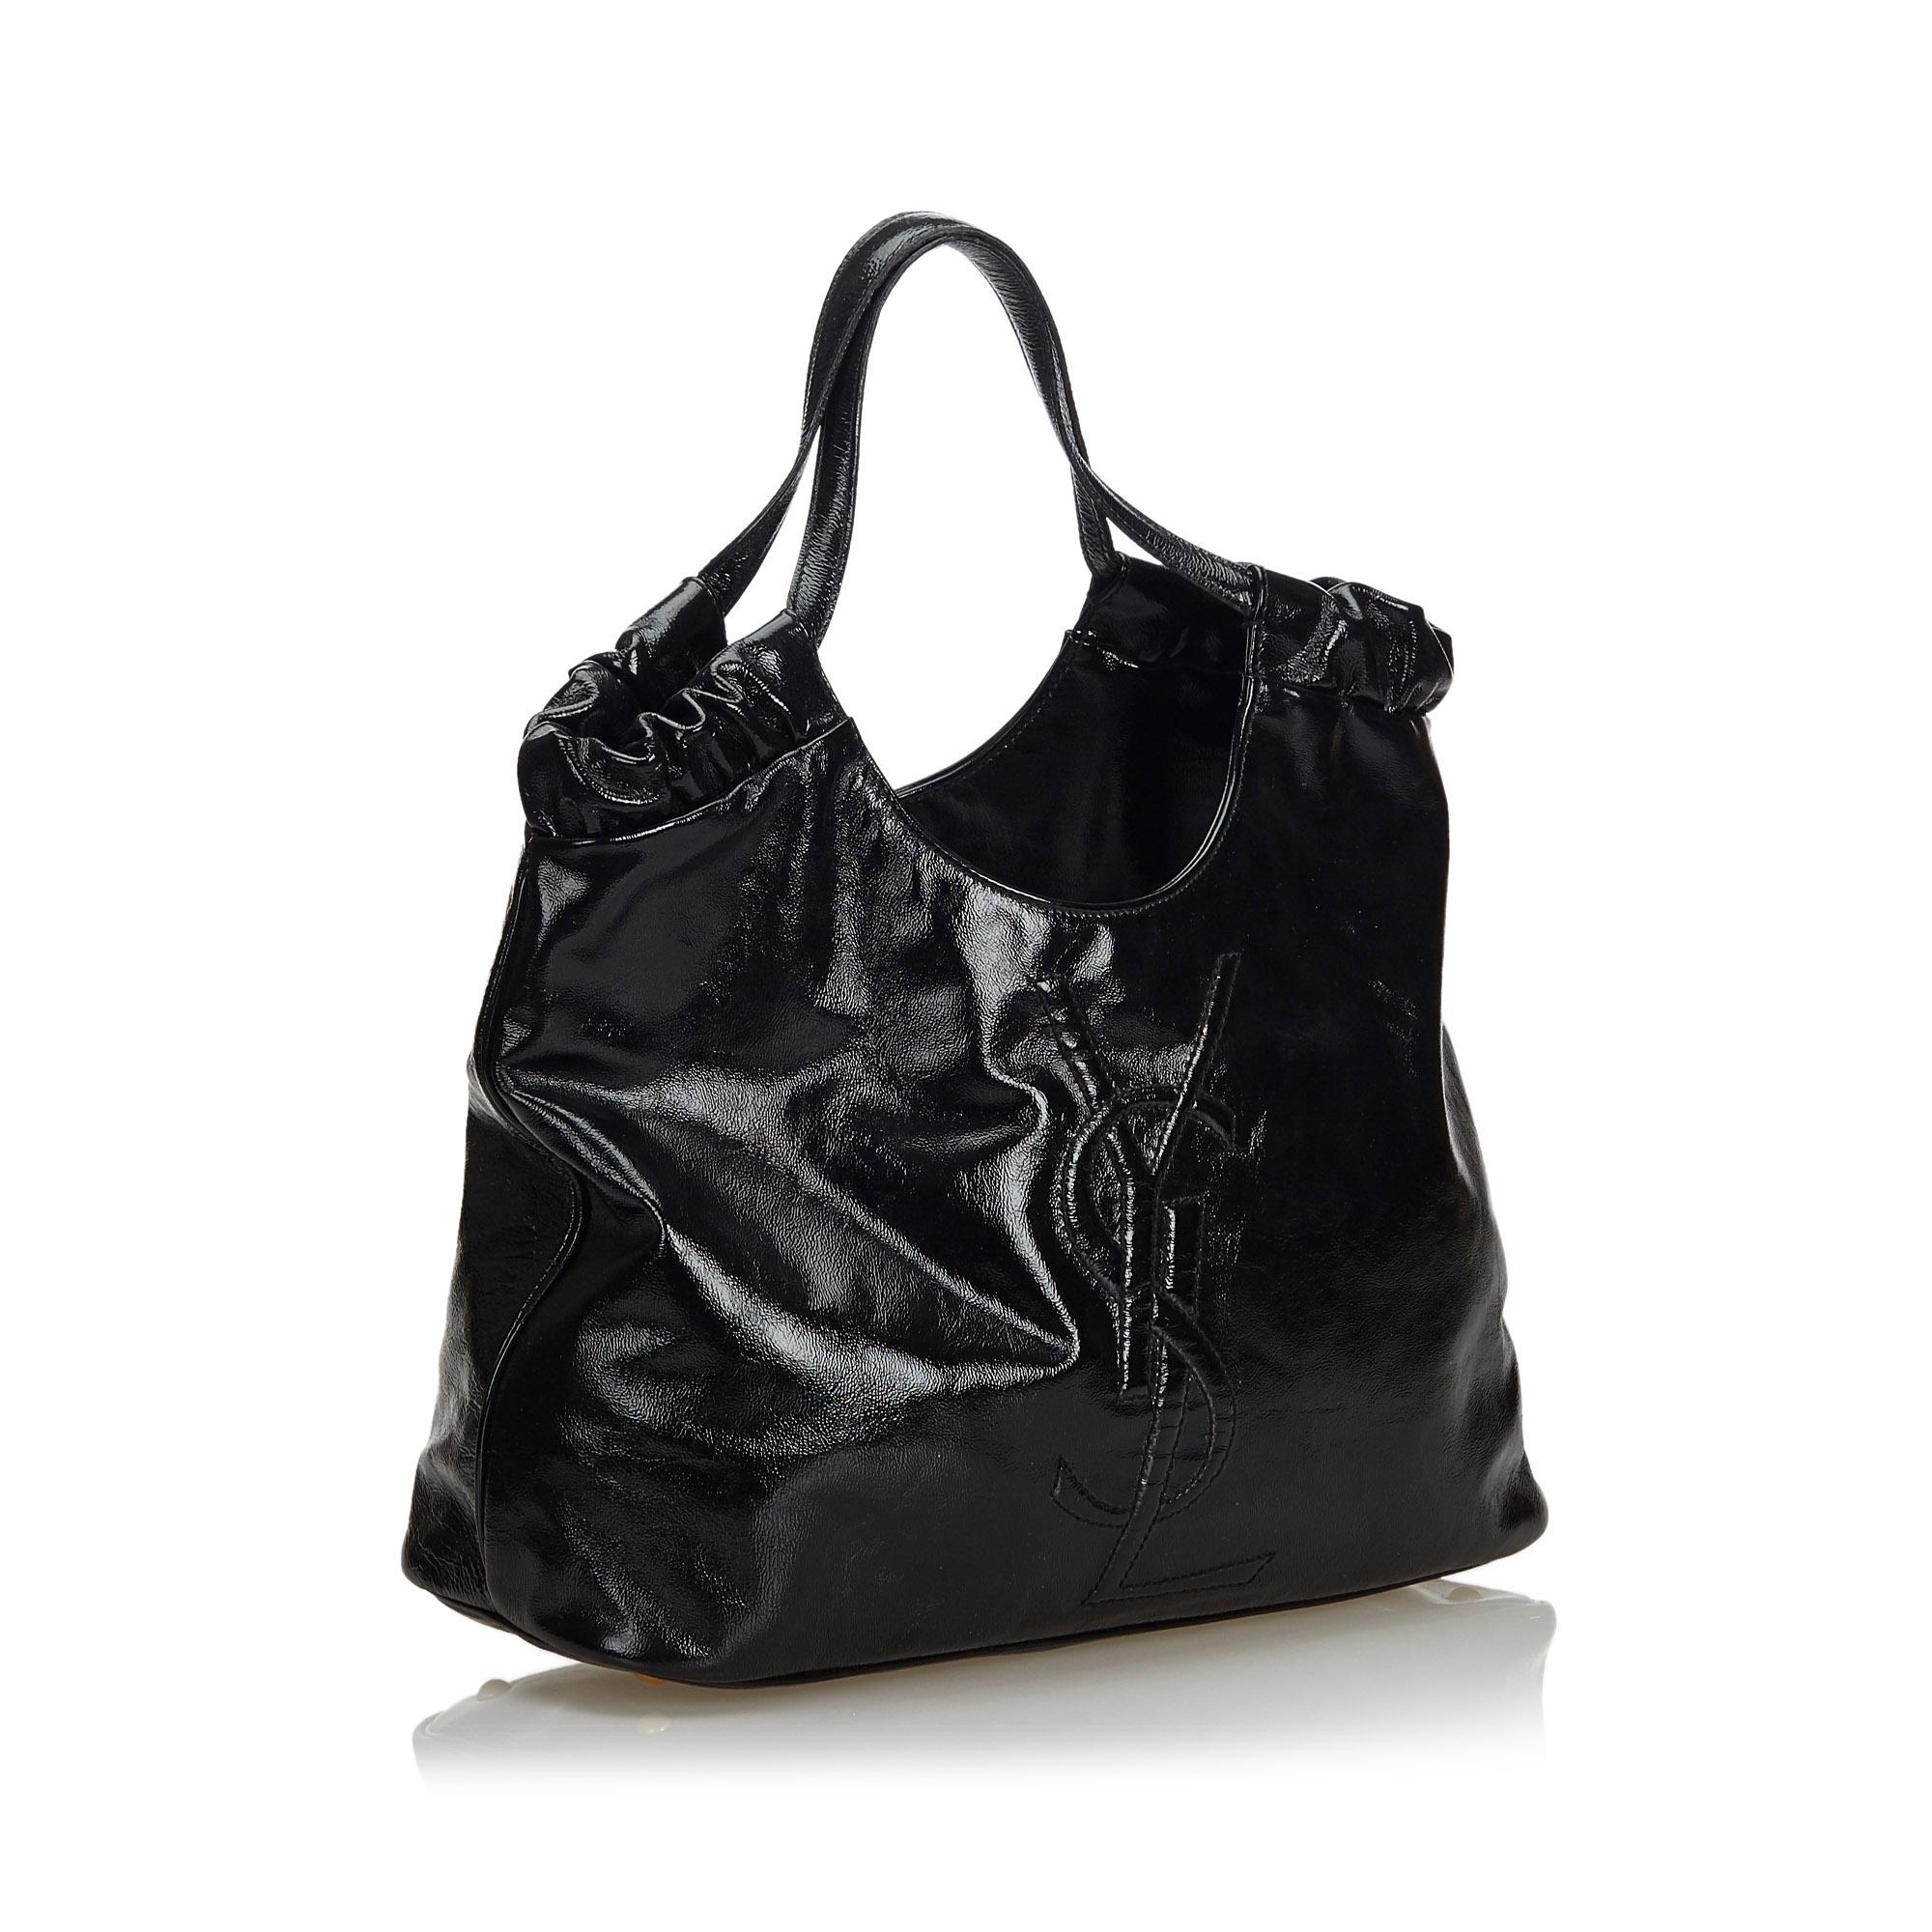 The Belle de Jour tote bag features a patent leather body, flat leather handles, an open top, and interior zip and slip pockets. It carries as AB condition rating.

Inclusions: 
This item does not come with inclusions.

Dimensions:
Length: 23.00